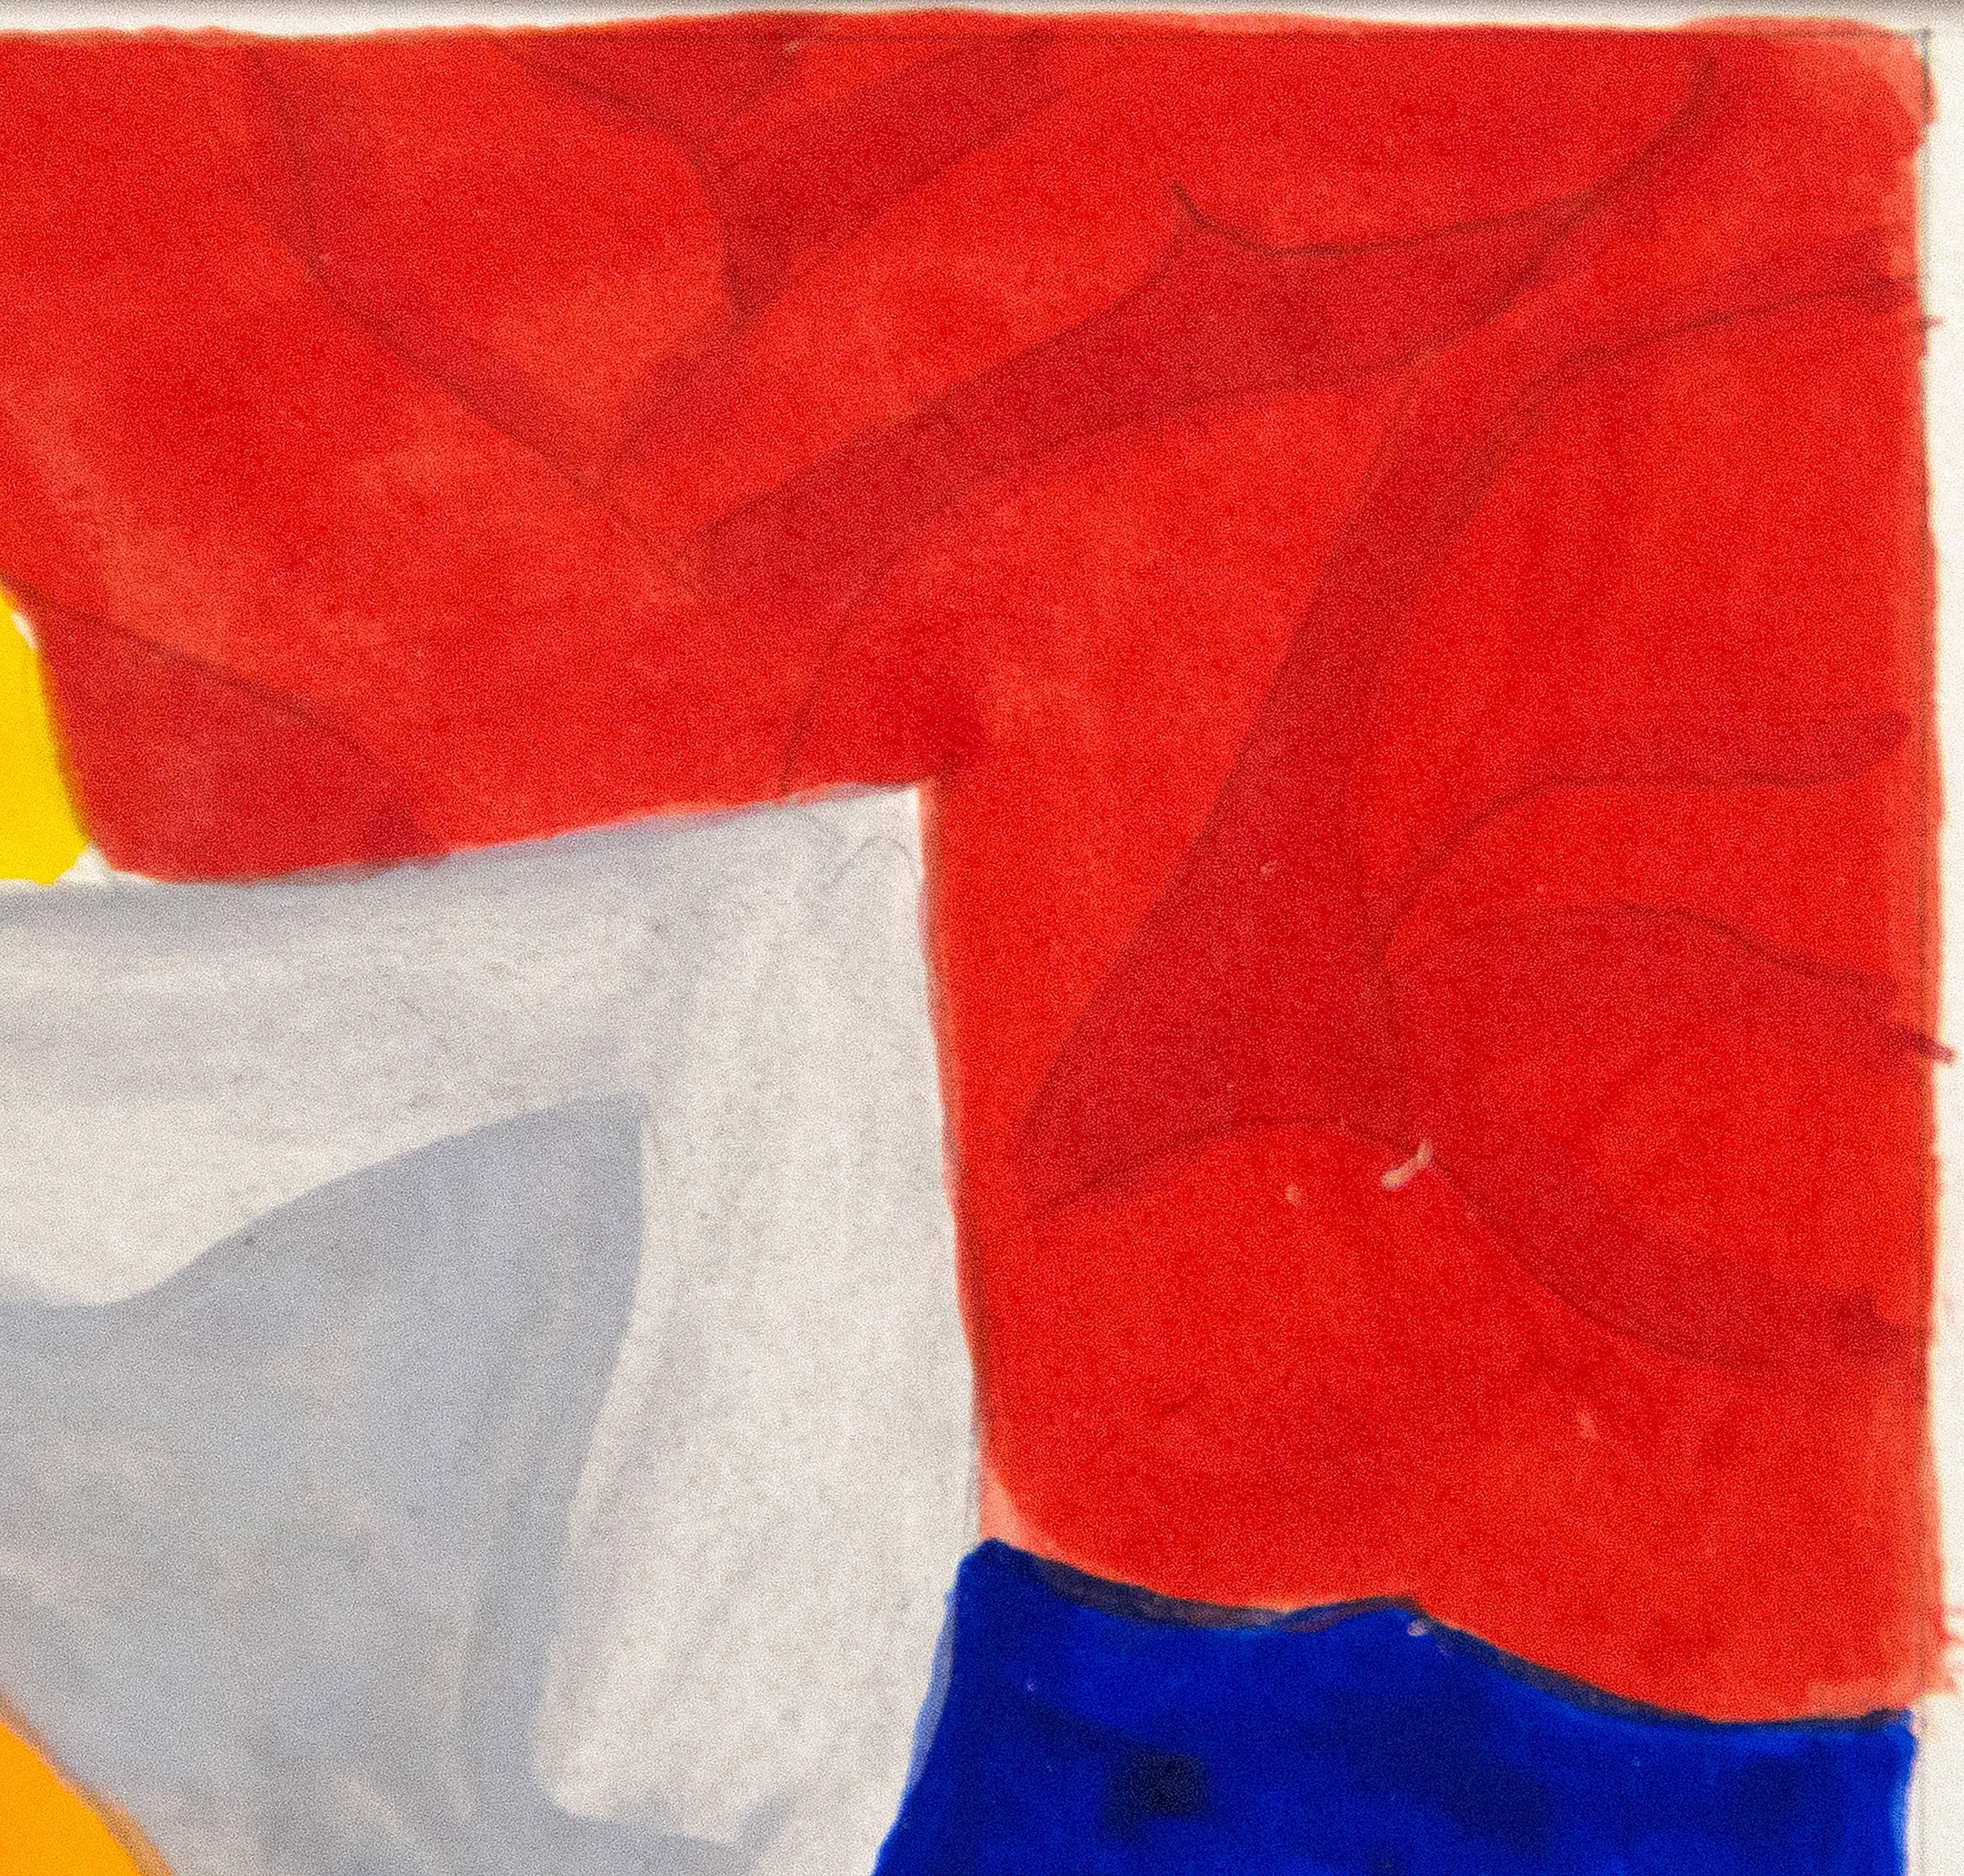 A work on paper by Tom Wesselmann. 